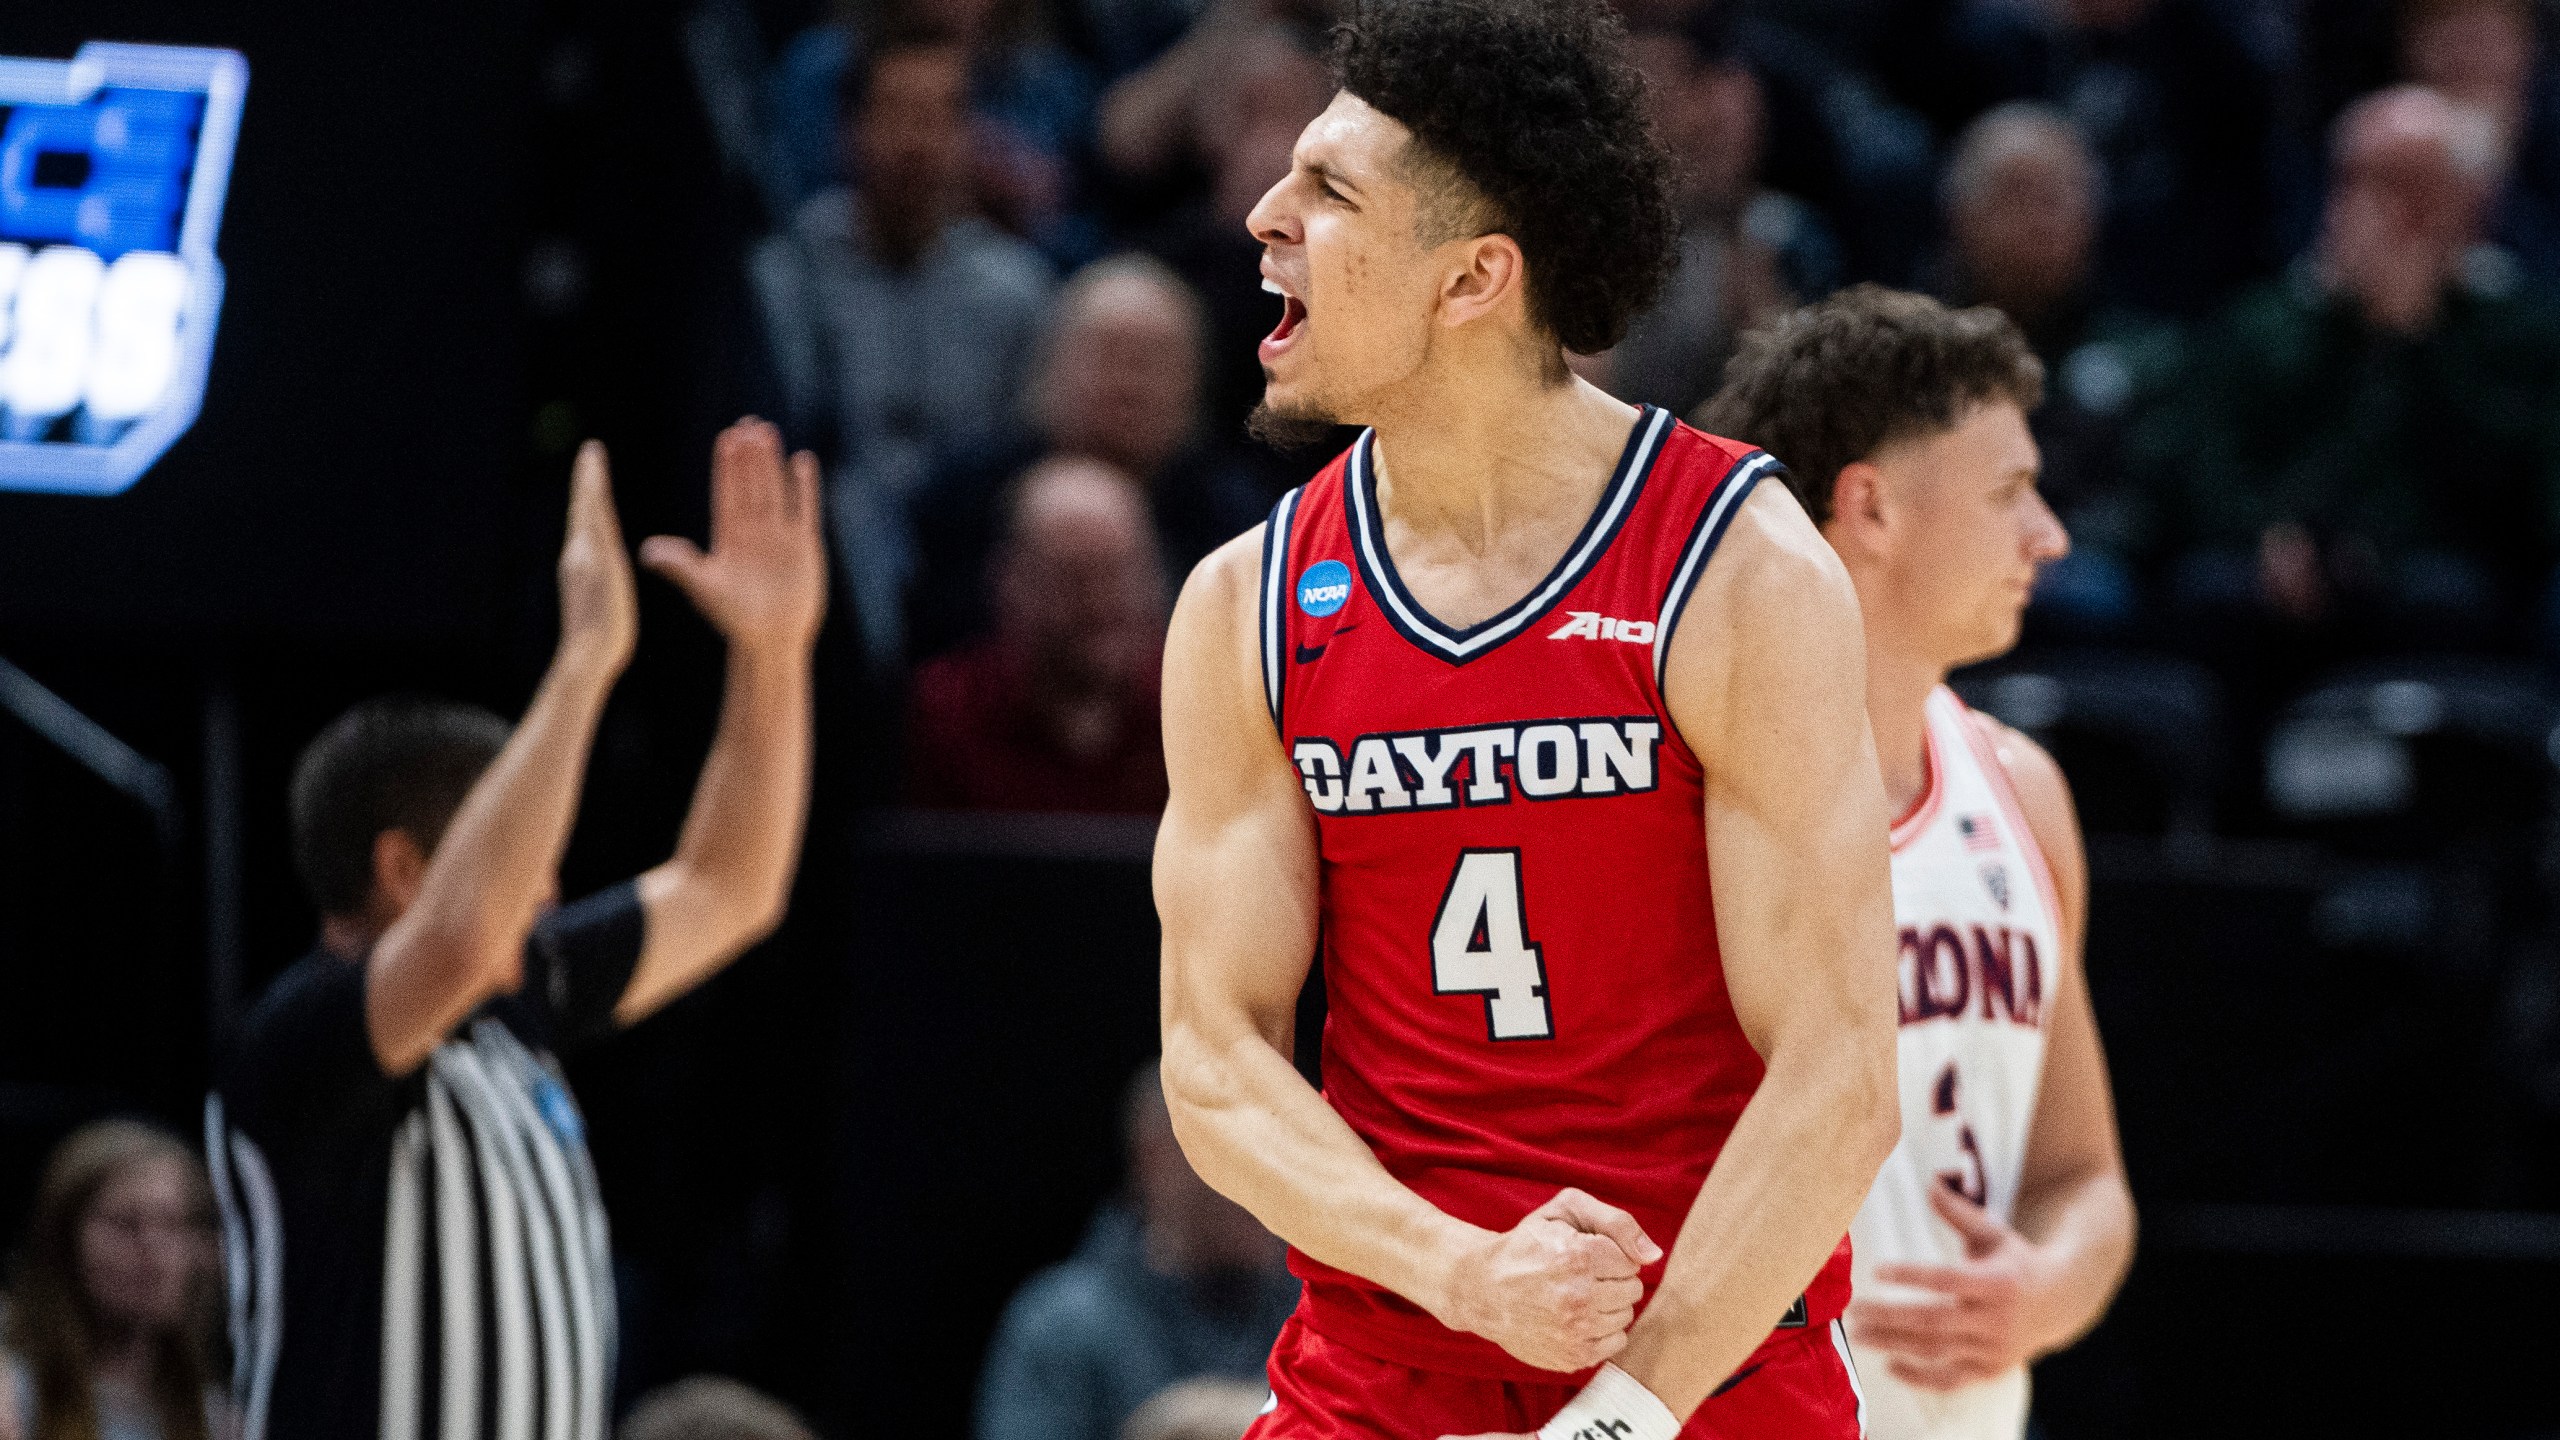 Dayton guard Koby Brea (4) celebrates after making a basket against Arizona during the first half of a second-round college basketball game in the NCAA Tournament in Salt Lake City, Saturday, March 23, 2024. (AP Photo/Isaac Hale)